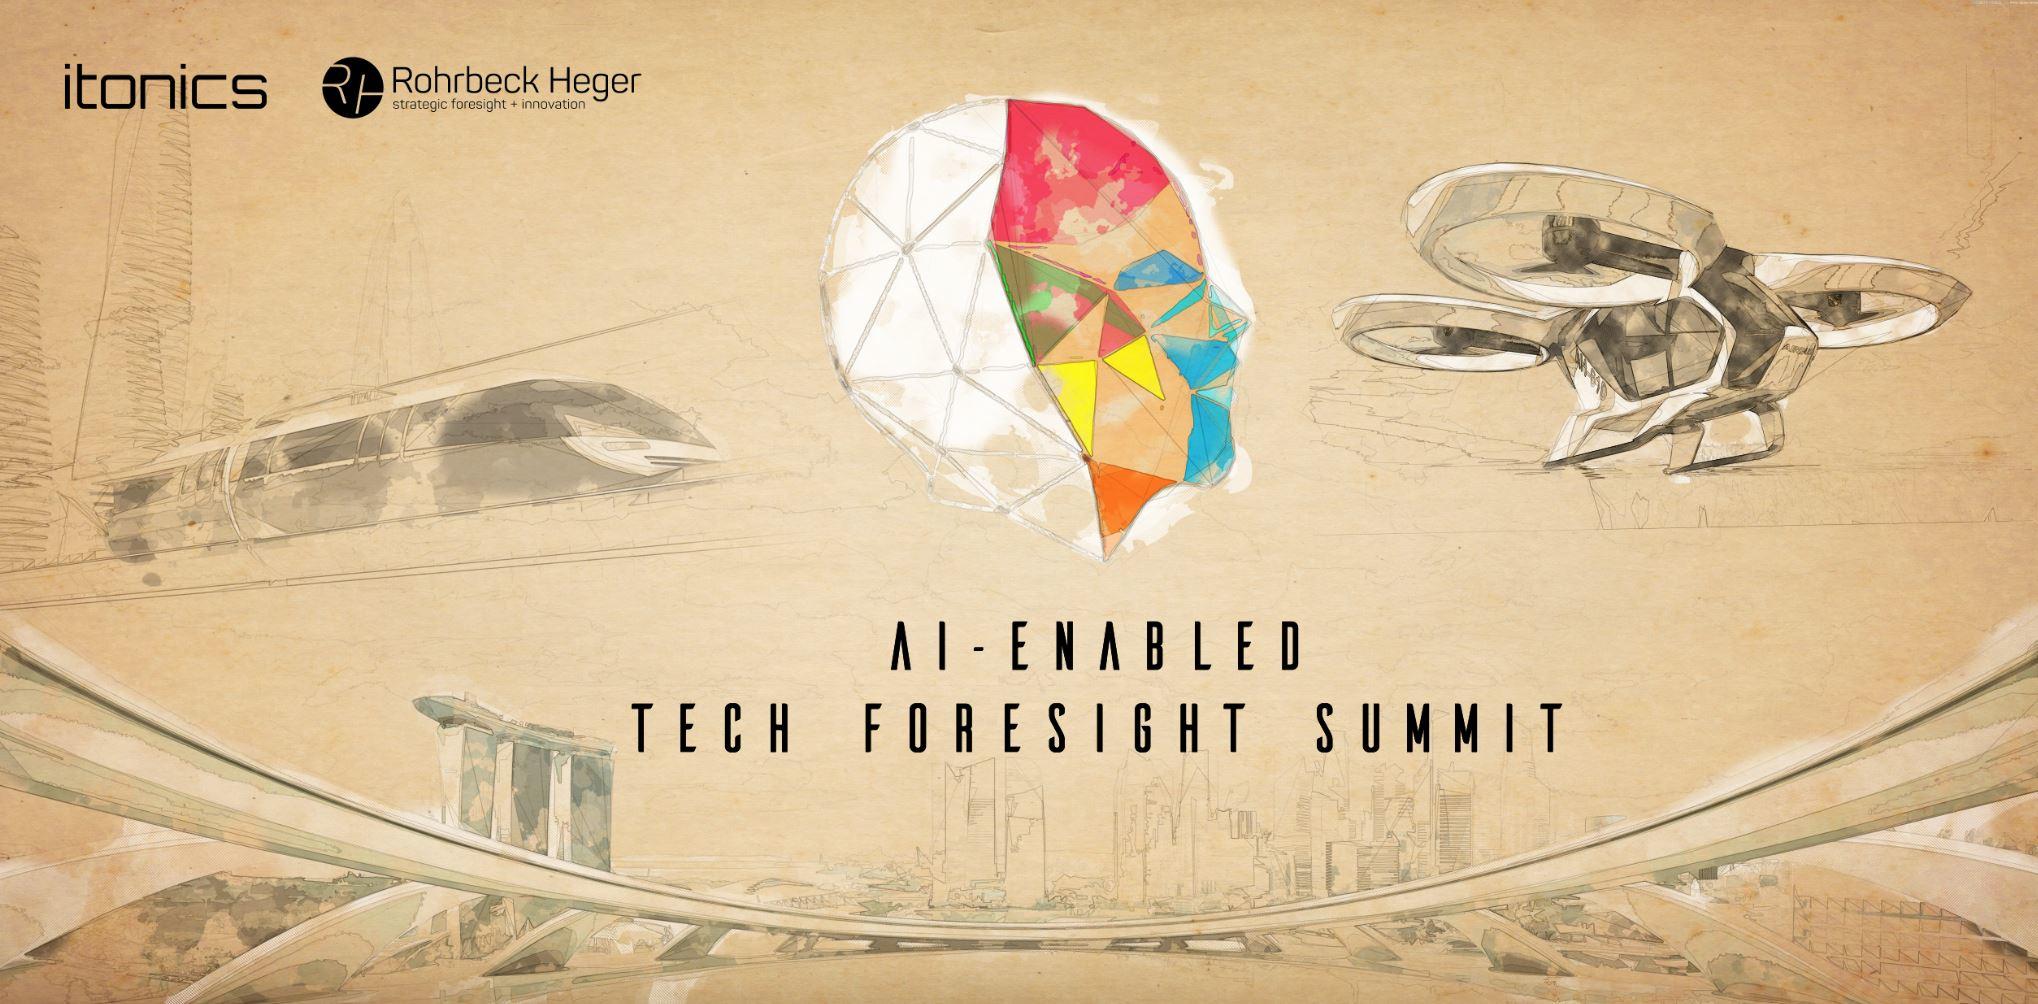 Featured image: AI-enabled Technology Foresight Summit by ITONICS & Rohrbeck Heger